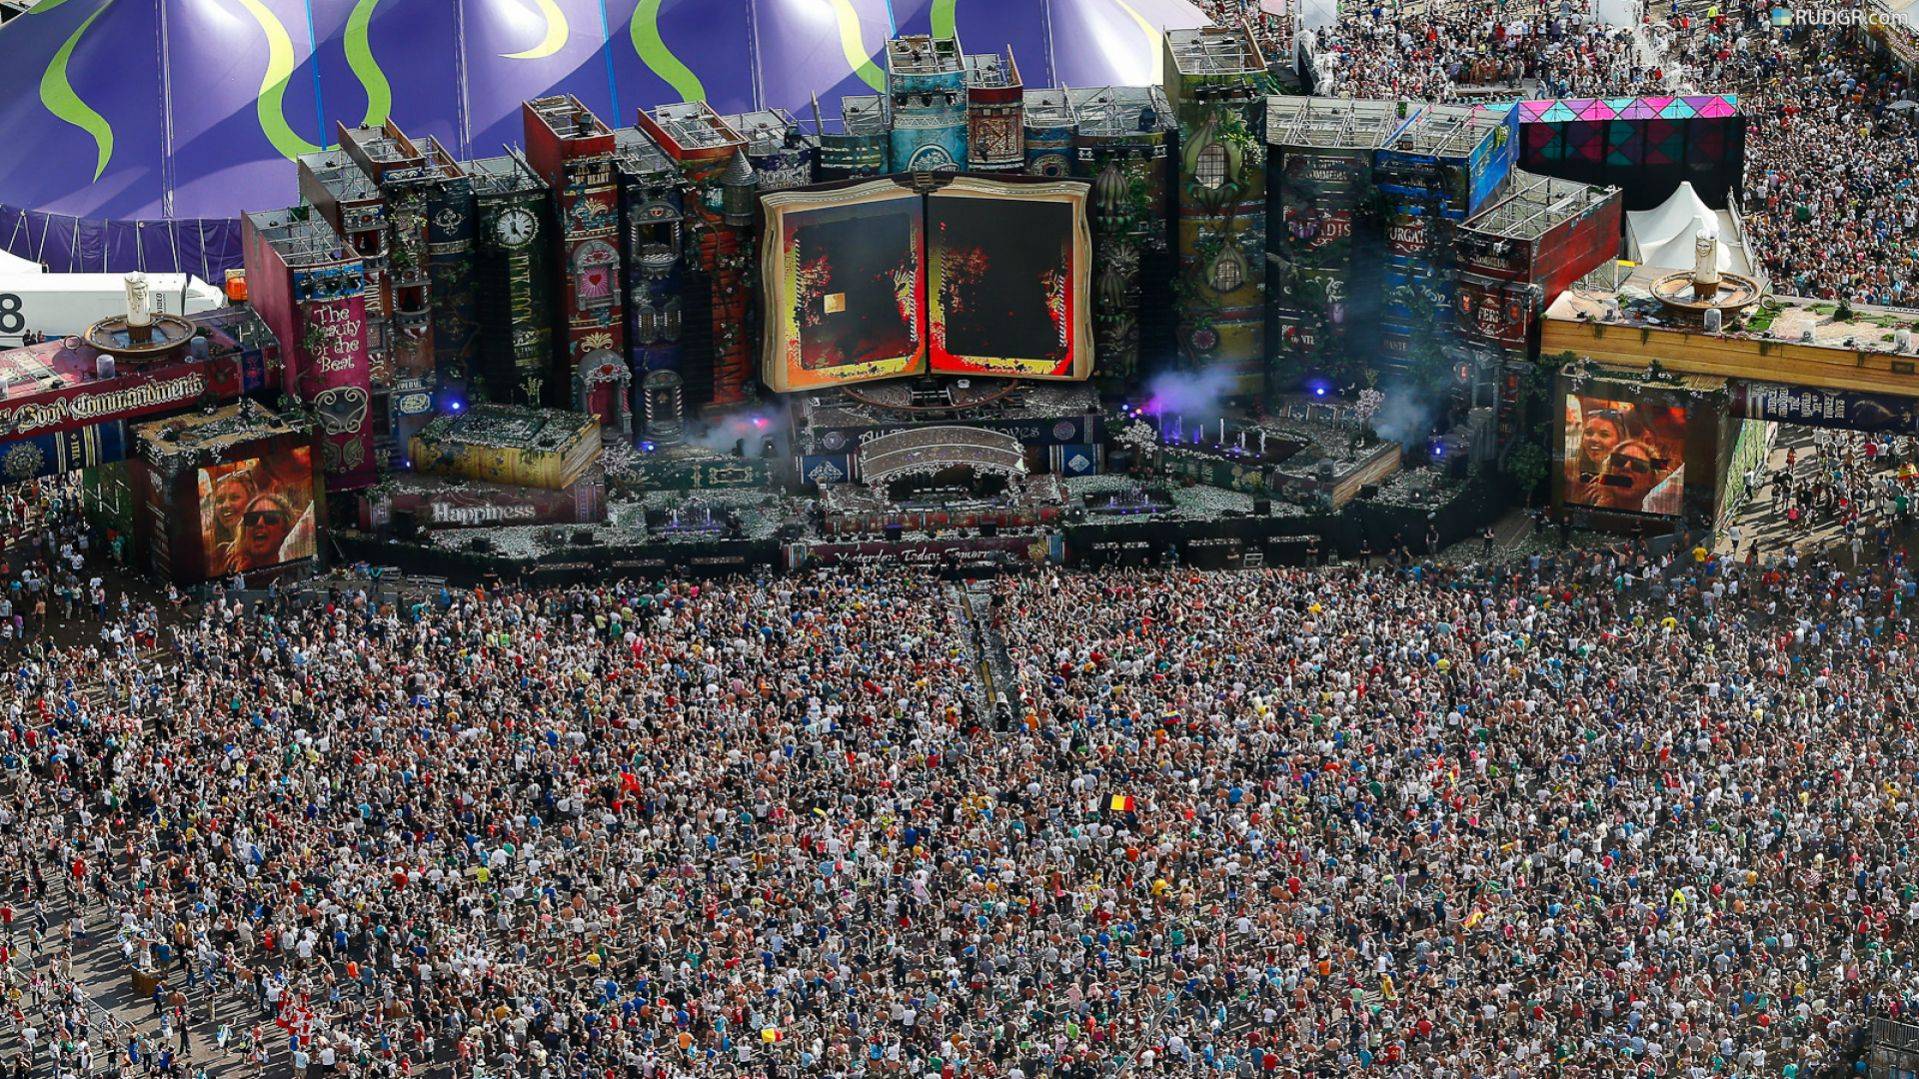 EDM, Concerts, Music, Dubstep, Drumstep, Chillstep, Festivals, Tomorrowland Wallpaper